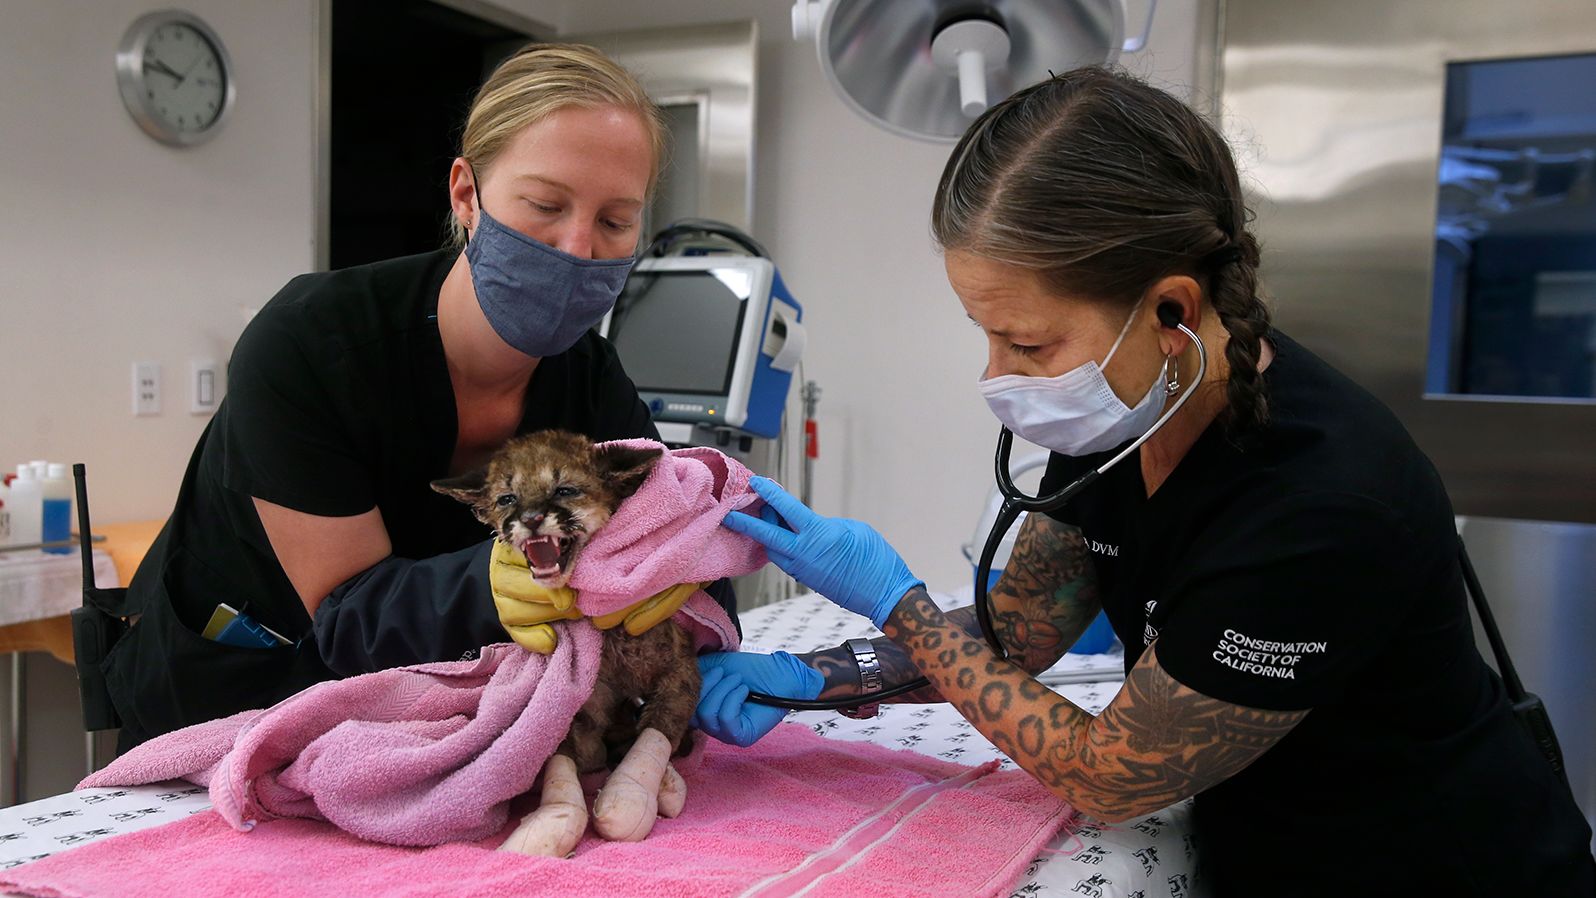 Dr. Alex Herman, right, and veterinary technician Linden West examine <a href="http://www.cnn.com/2020/10/01/us/mountain-lion-cub-rescued-california-zogg-fire/index.html" target="_blank">Captain Cal,</a> a 6-week-old mountain lion cub recovering from severe burn injuries at the Oakland Zoo Hospital in Oakland, California. The zoo later took in <a href="http://www.cnn.com/2020/10/11/us/oakland-zoo-mountain-lion-rescued-from-wildfire-trnd/index.html" target="_blank">two more cubs rescued</a> from the same fire.